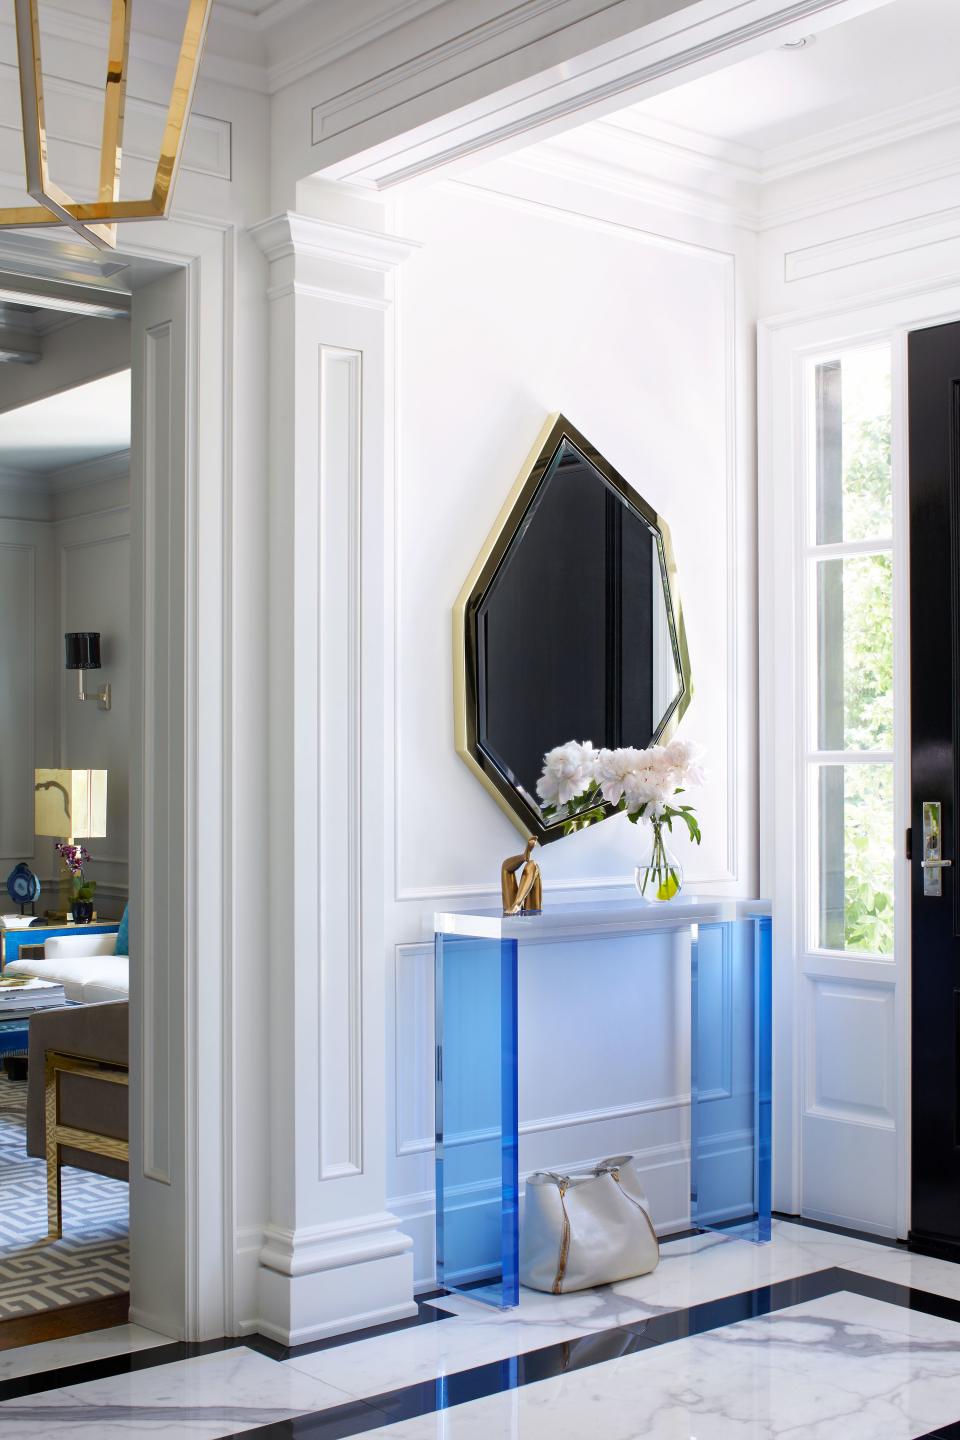 An asymmetrical brass mirror and transparent blue Lucite console make a modern statement against the entryway’s classic black-and-white marble floors. “Each room is very different, yet the spaces transition so beautifully from one to the next,” Hepfer says.